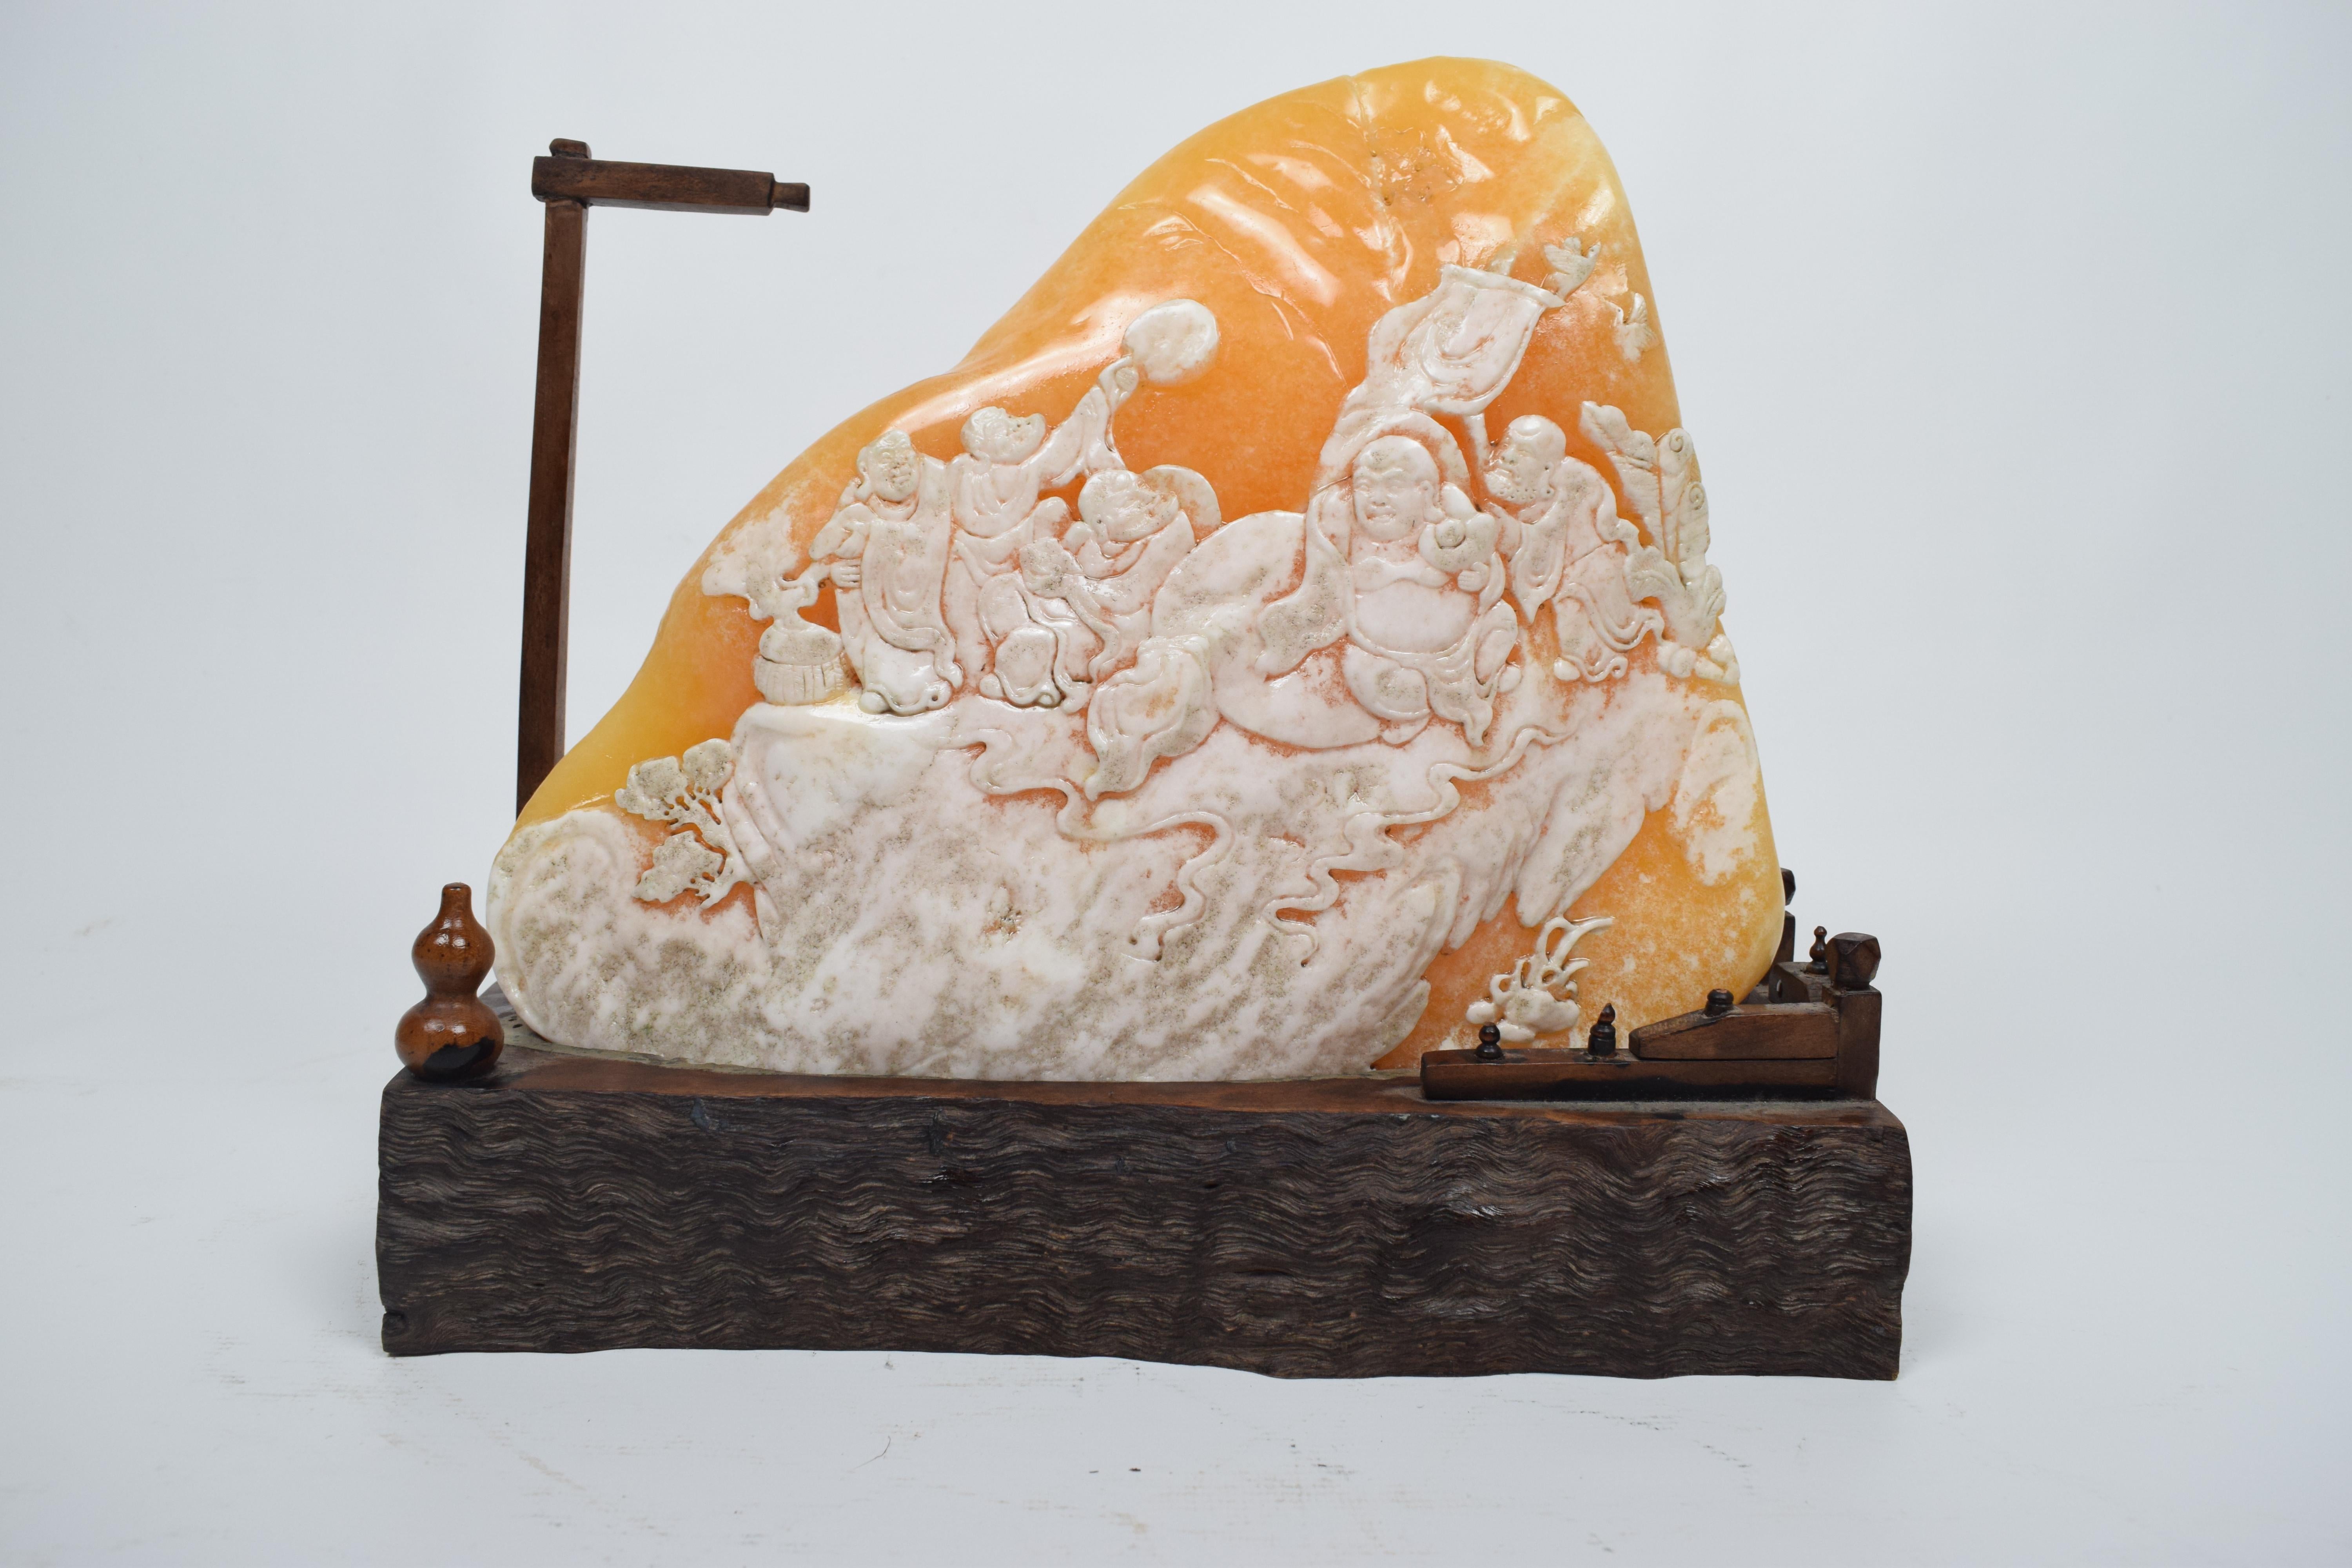 The radiating yellow soapstone carving depicts a serene and spiritually evocative scene set in the elevated hills, capturing the essence of Buddhist monks in the 20th century. The soapstone, with its warm and luminous yellow hue, adds a subtle glow